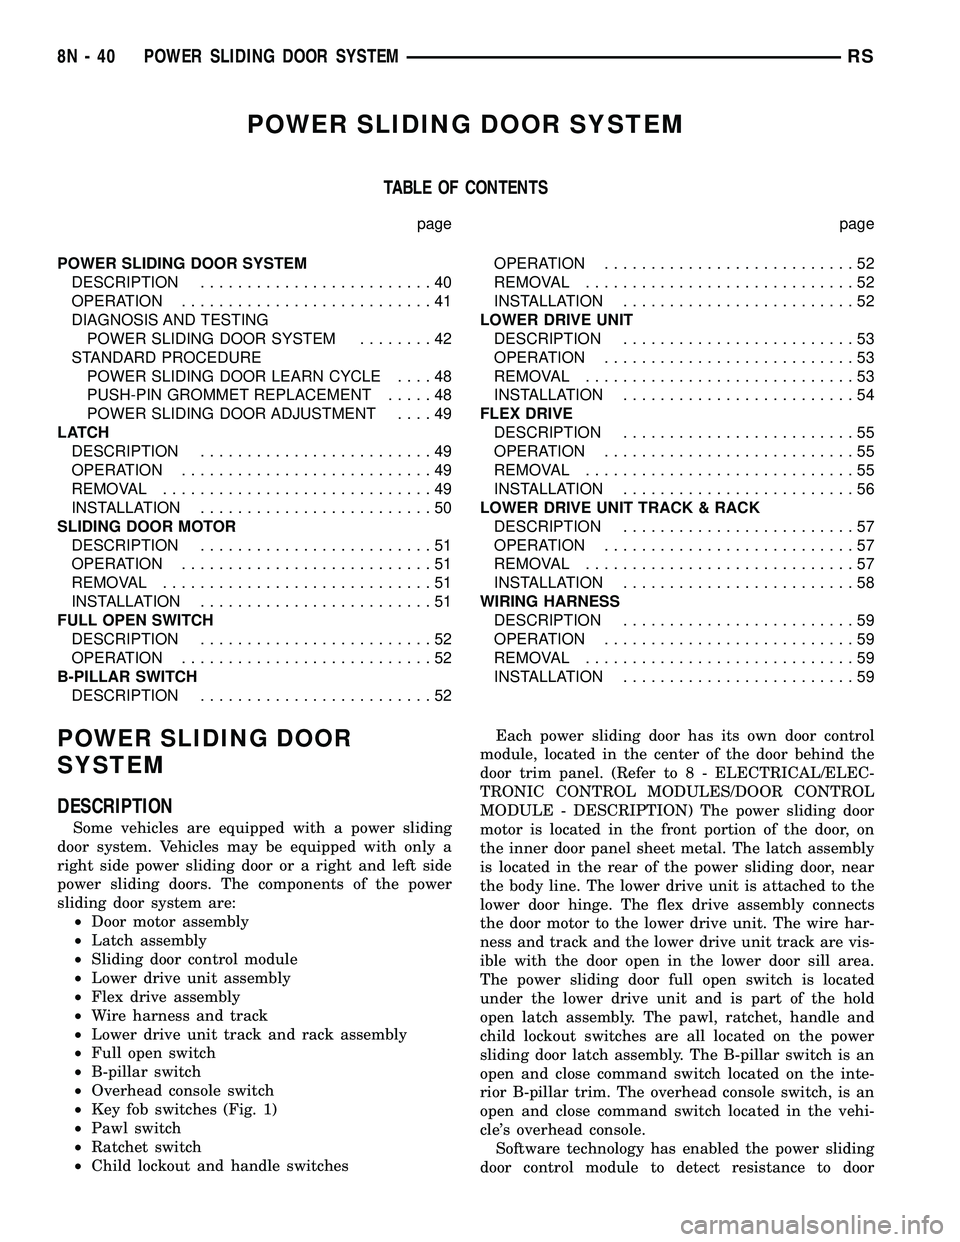 CHRYSLER VOYAGER 2005  Service Manual POWER SLIDING DOOR SYSTEM
TABLE OF CONTENTS
page page
POWER SLIDING DOOR SYSTEM
DESCRIPTION.........................40
OPERATION...........................41
DIAGNOSIS AND TESTING
POWER SLIDING DOOR S